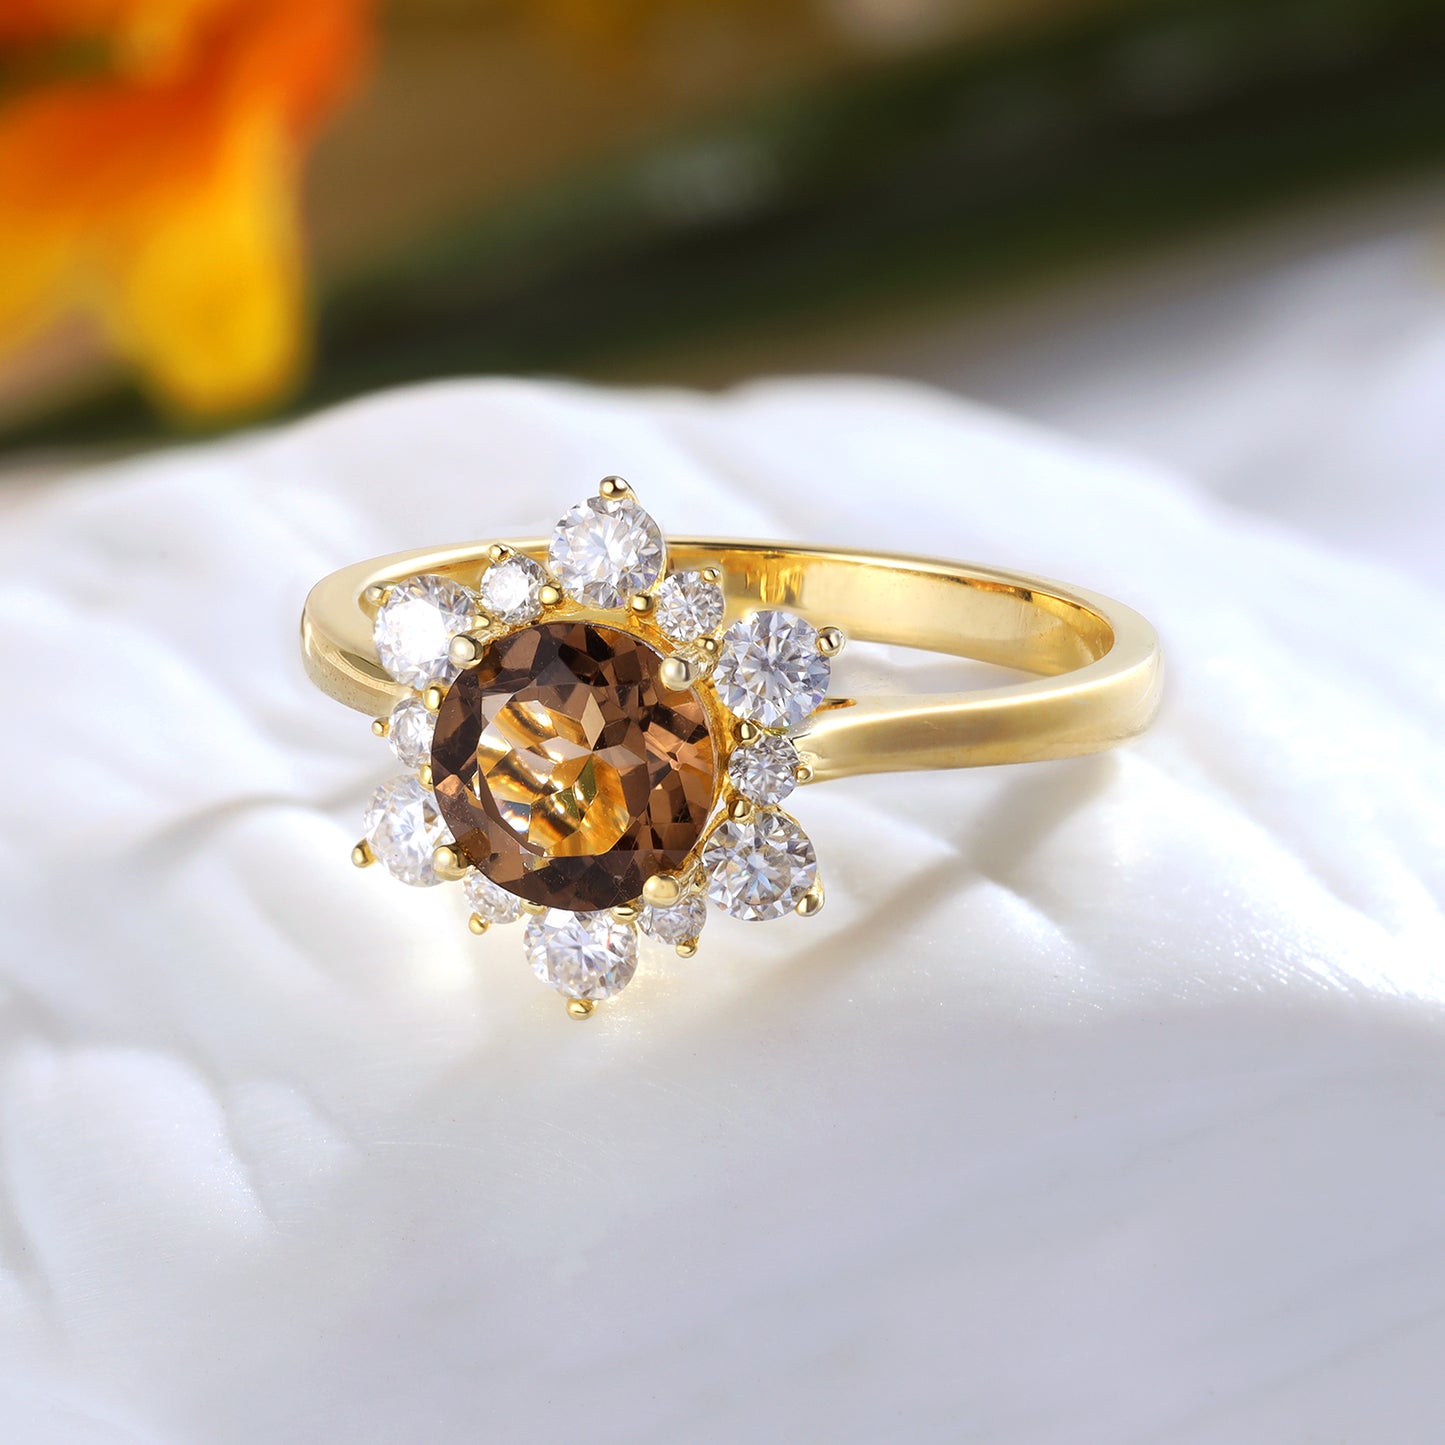 18K Gold Smoked Quartz With Moissanite Ring (Options for: Alexandrite, Onyx or Opal)